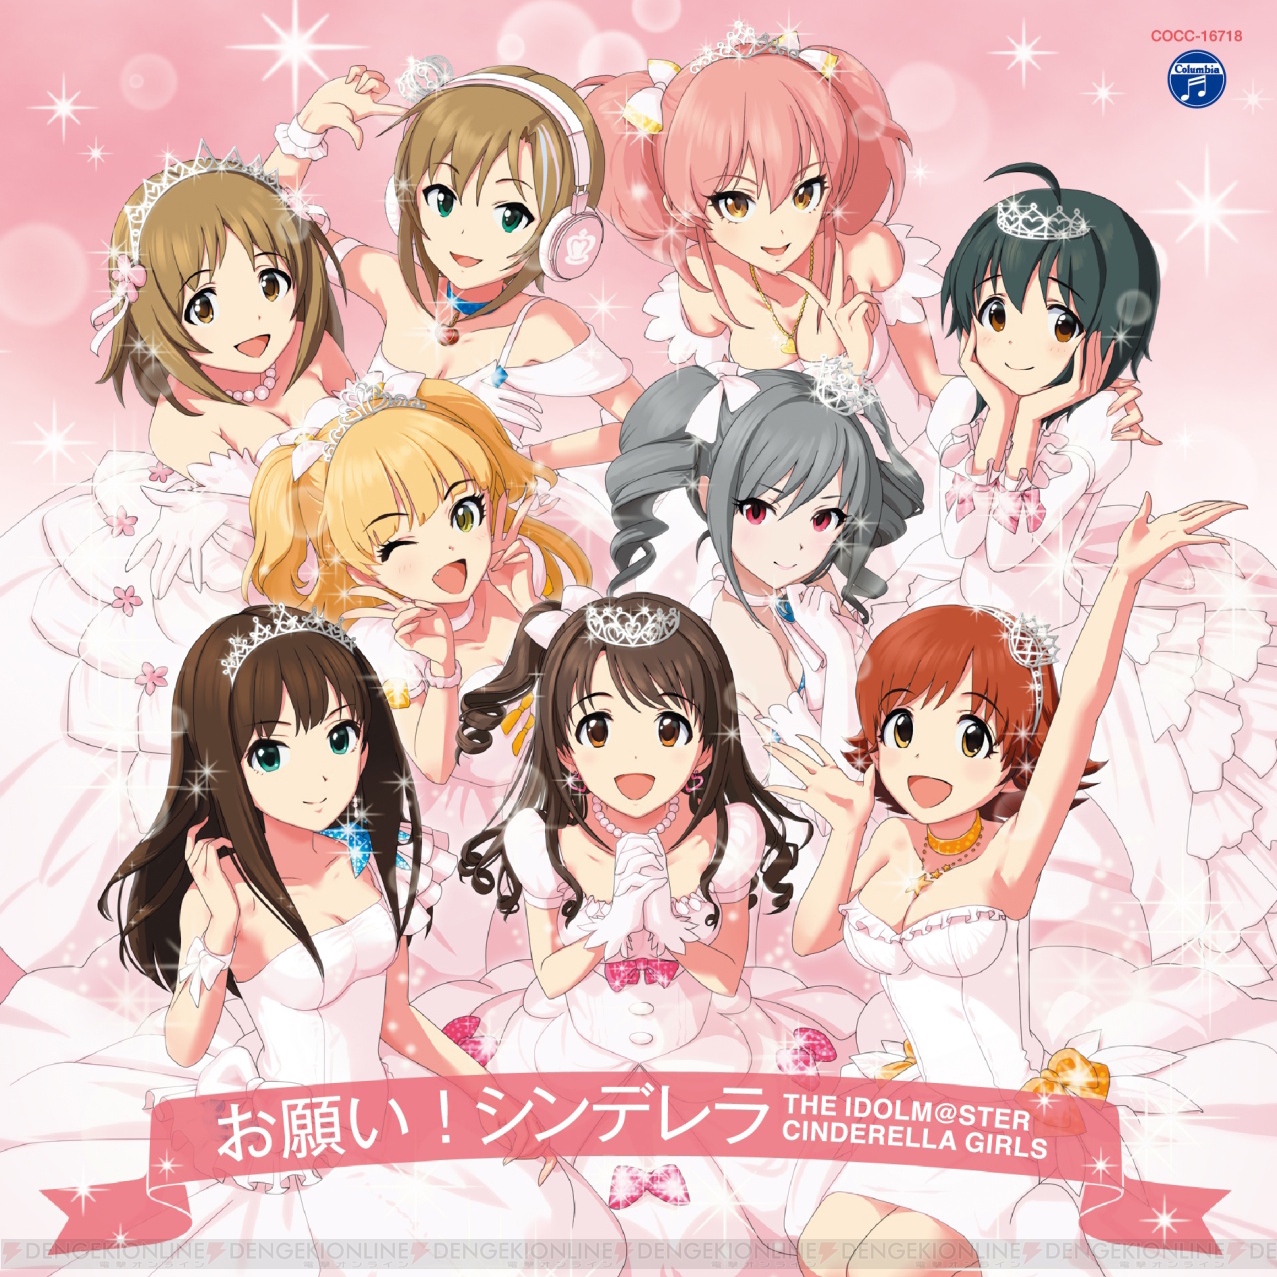 8tracks Top 2 Mixes Hottest The Idolm Ster Cinderella Girls Online Radio Stations Listen To Free The Idolm Ster Cinderella Girls Music Playlists